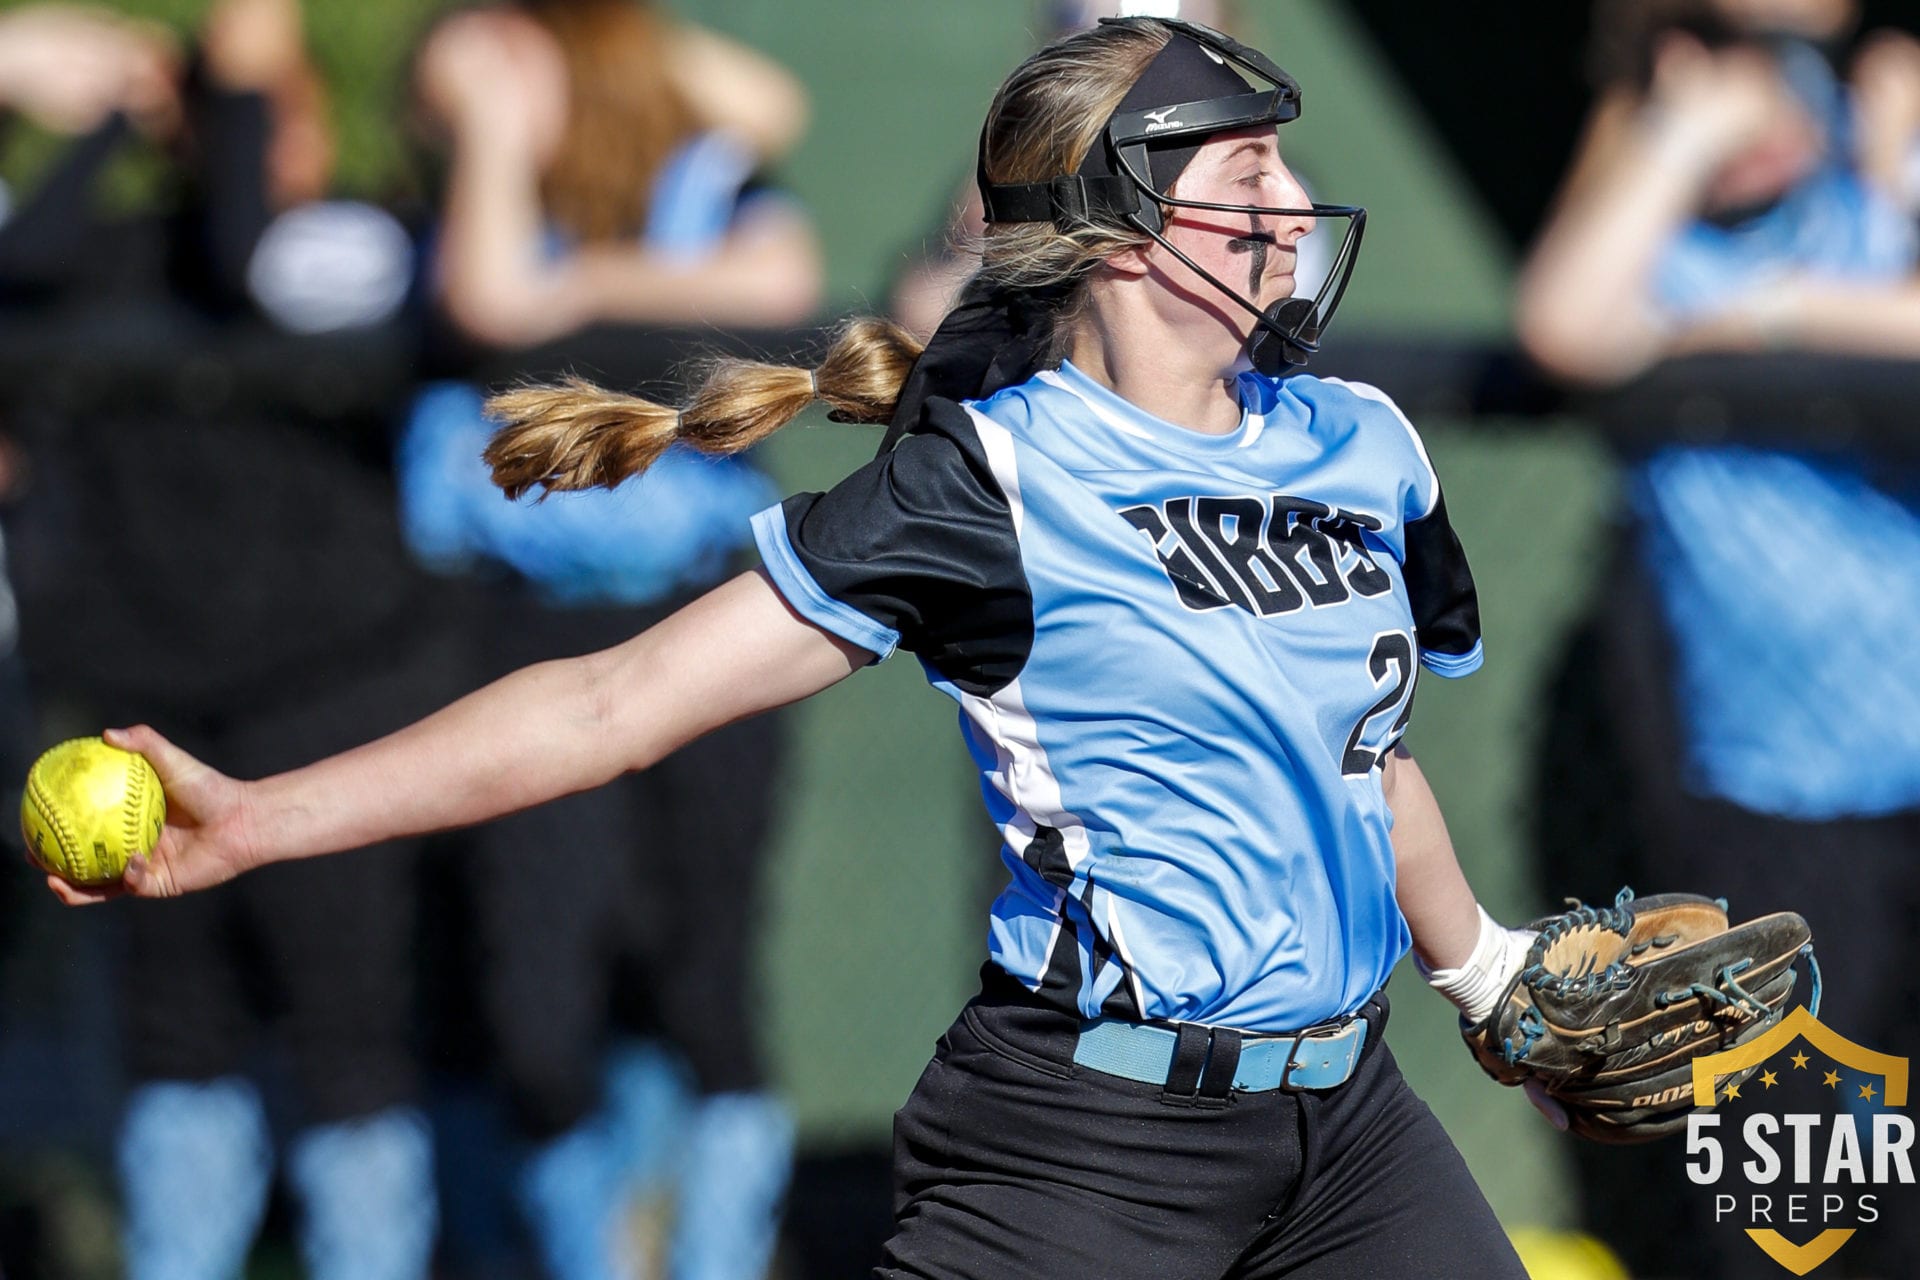 Gibbs Softball searching for usual form despite lack of games and youth